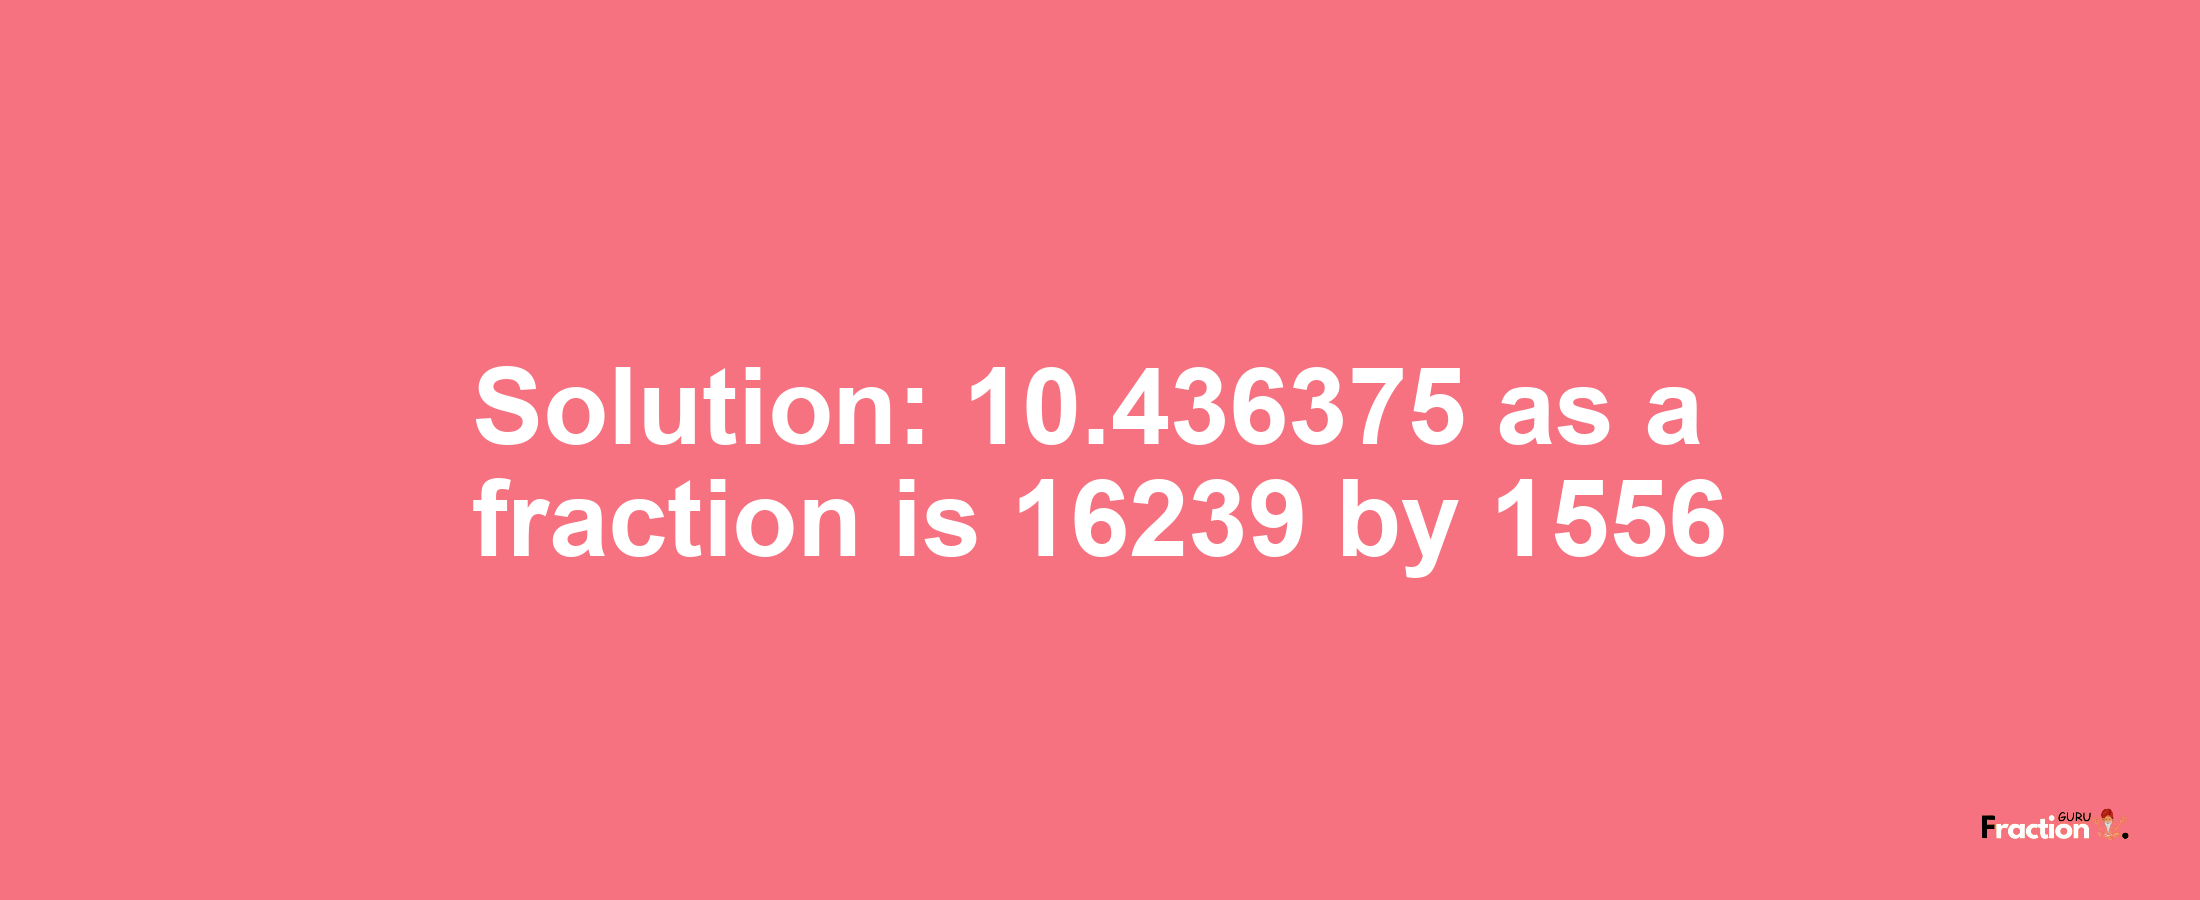 Solution:10.436375 as a fraction is 16239/1556